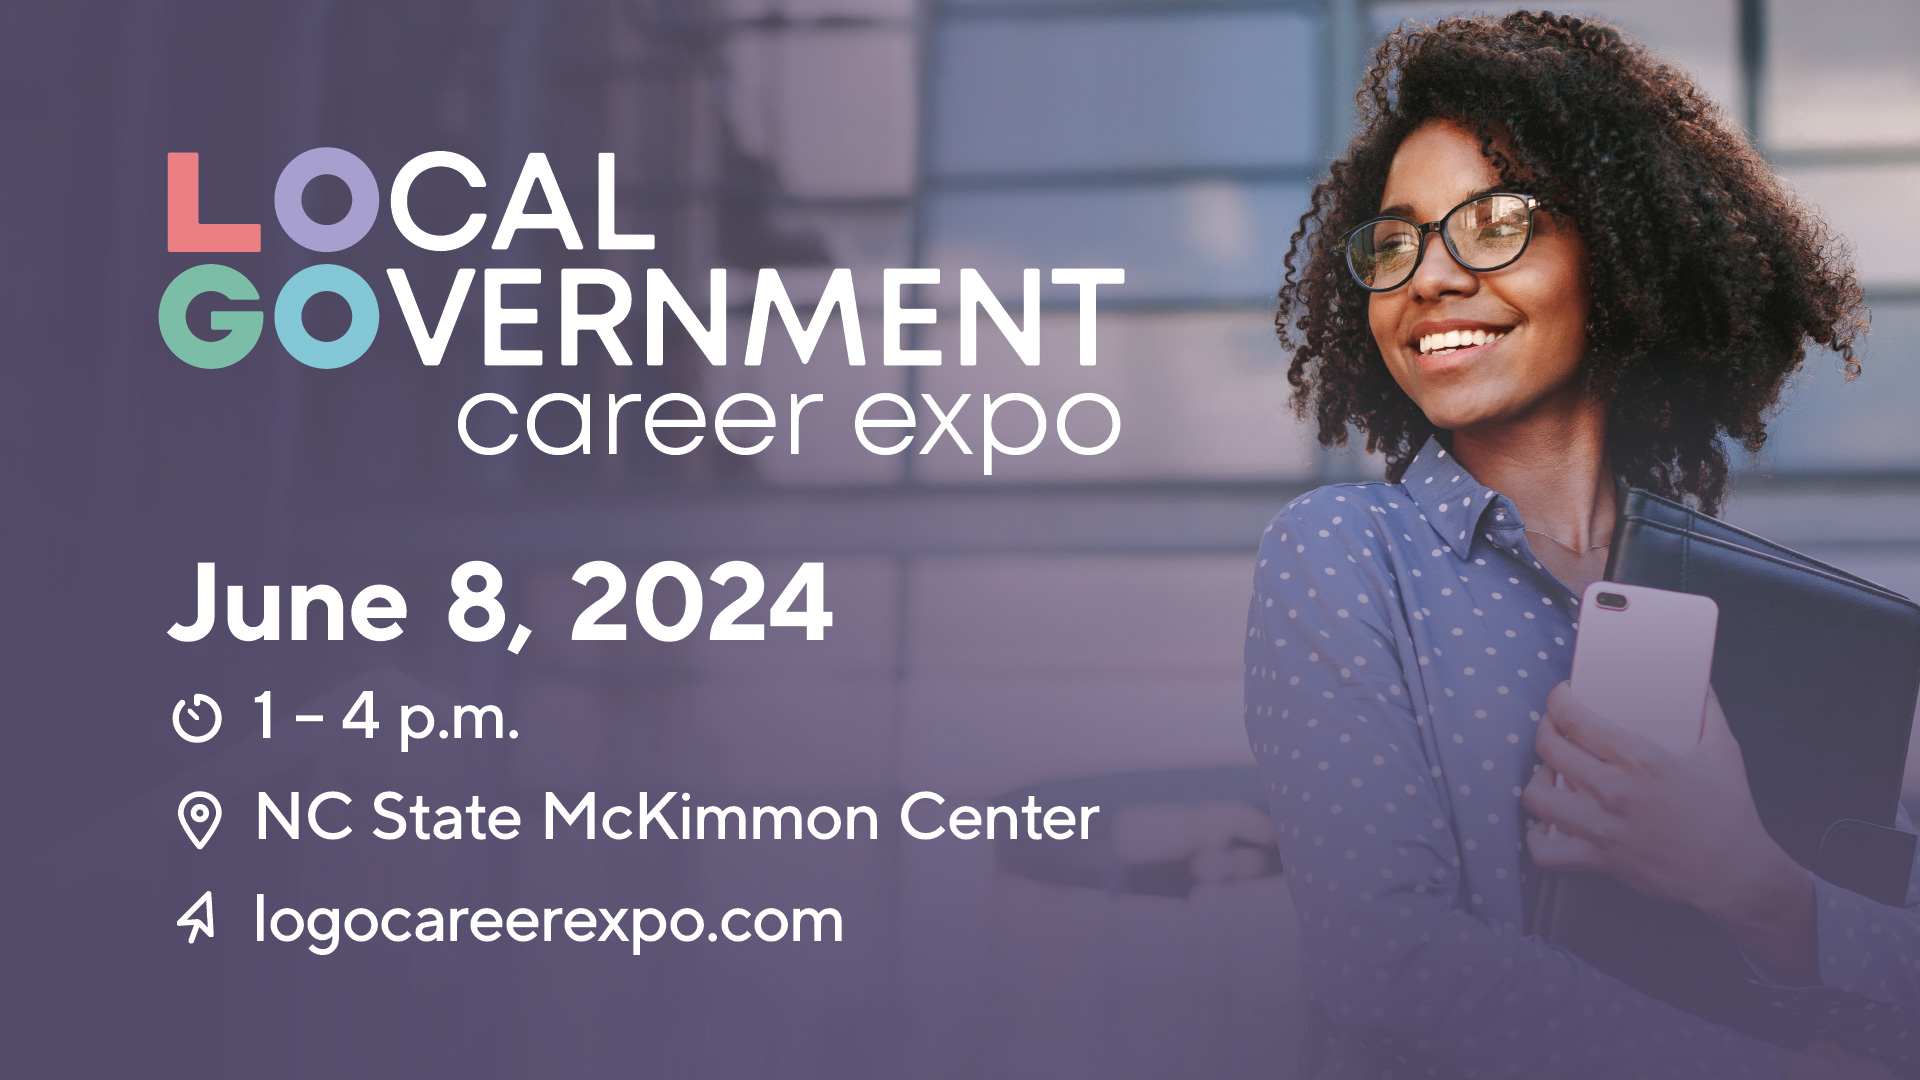 Local government career expo banner